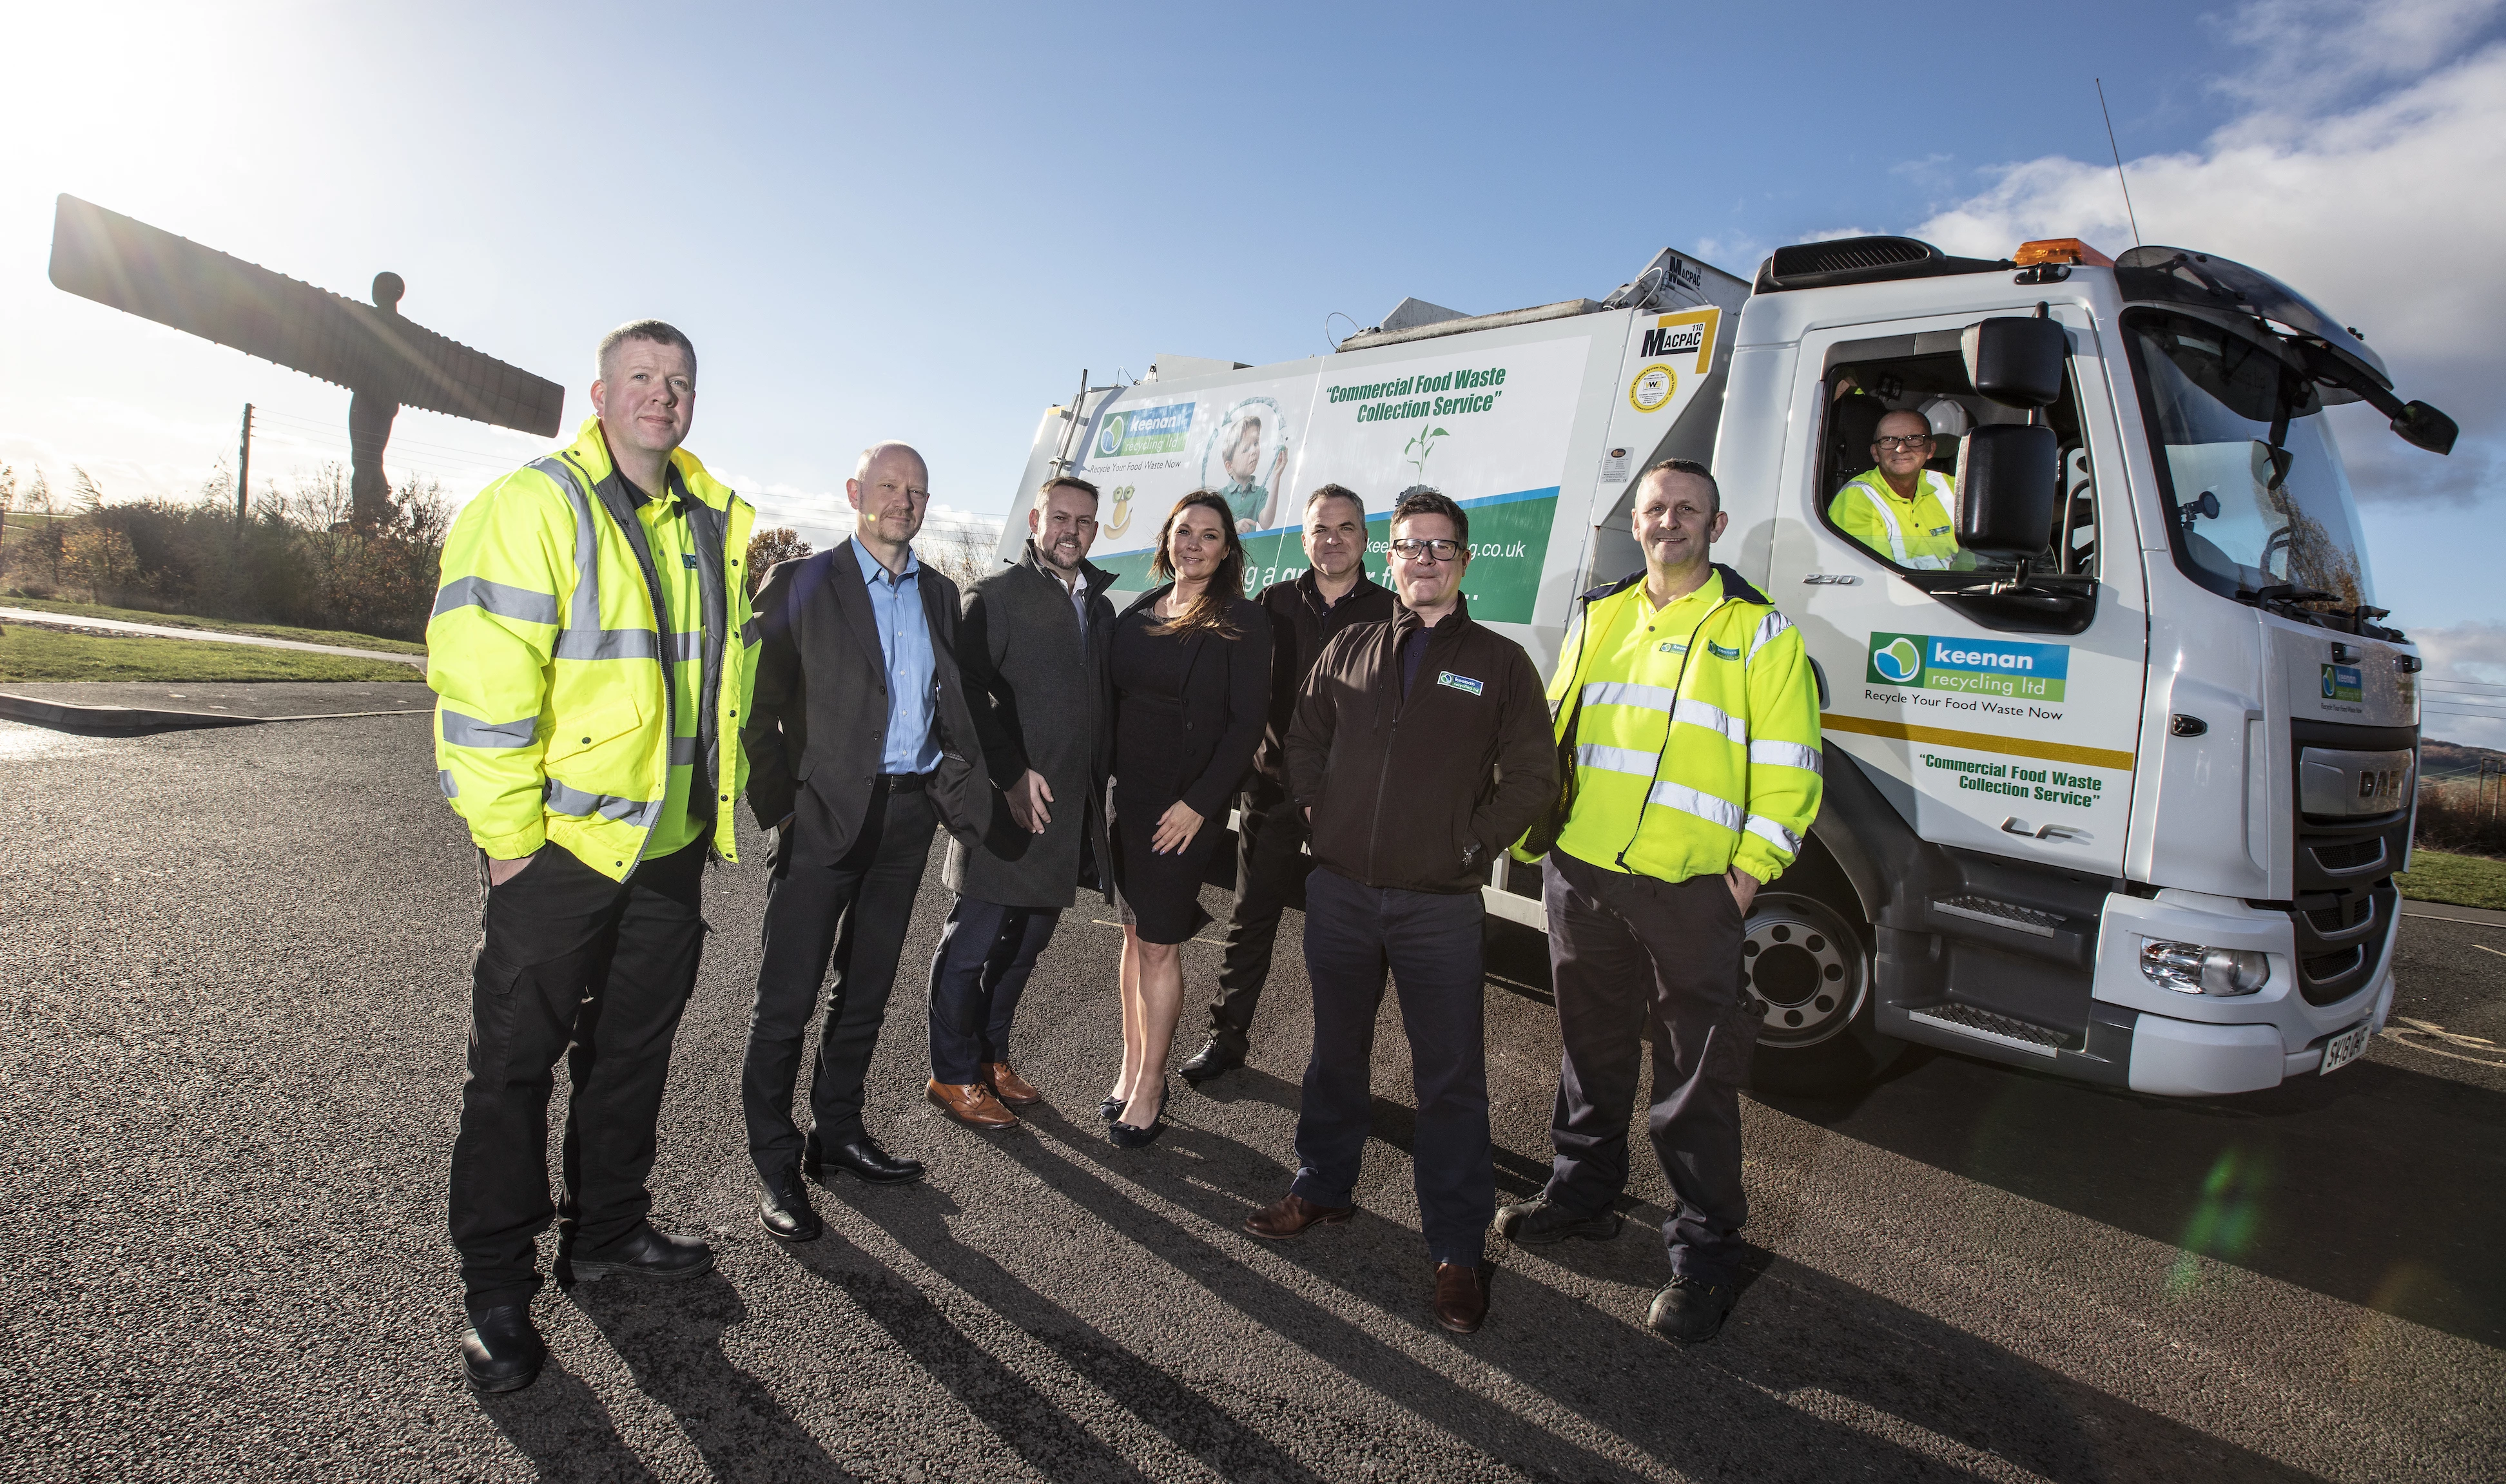 Keenan Recycling will recruit sales staff, account managers and fleet drivers